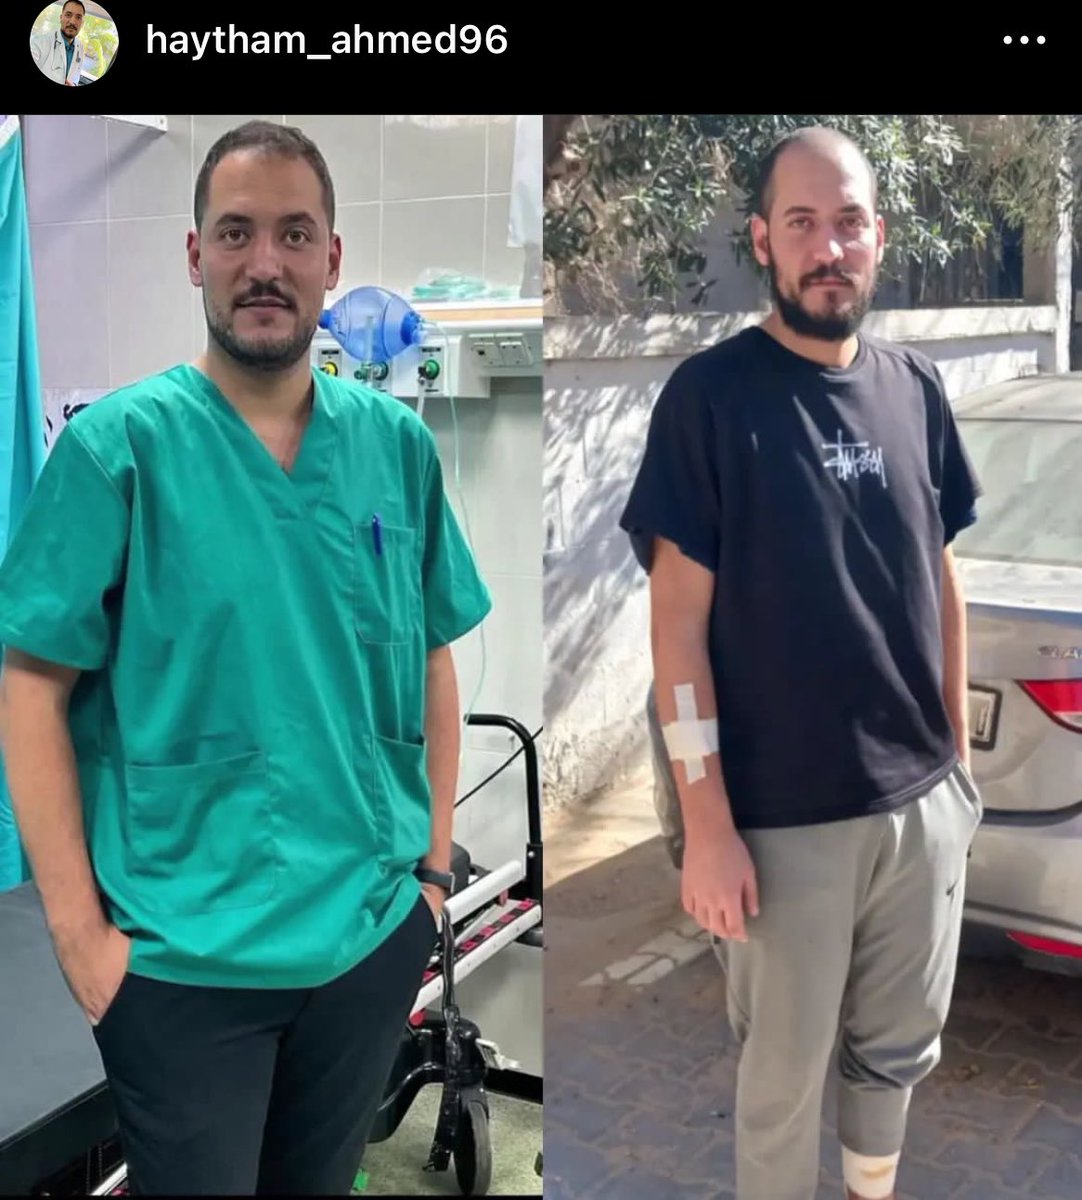 Dr. Haytham Ahmed, an emergency medical doctor from Gaza, was finally released after 50 days of detention.